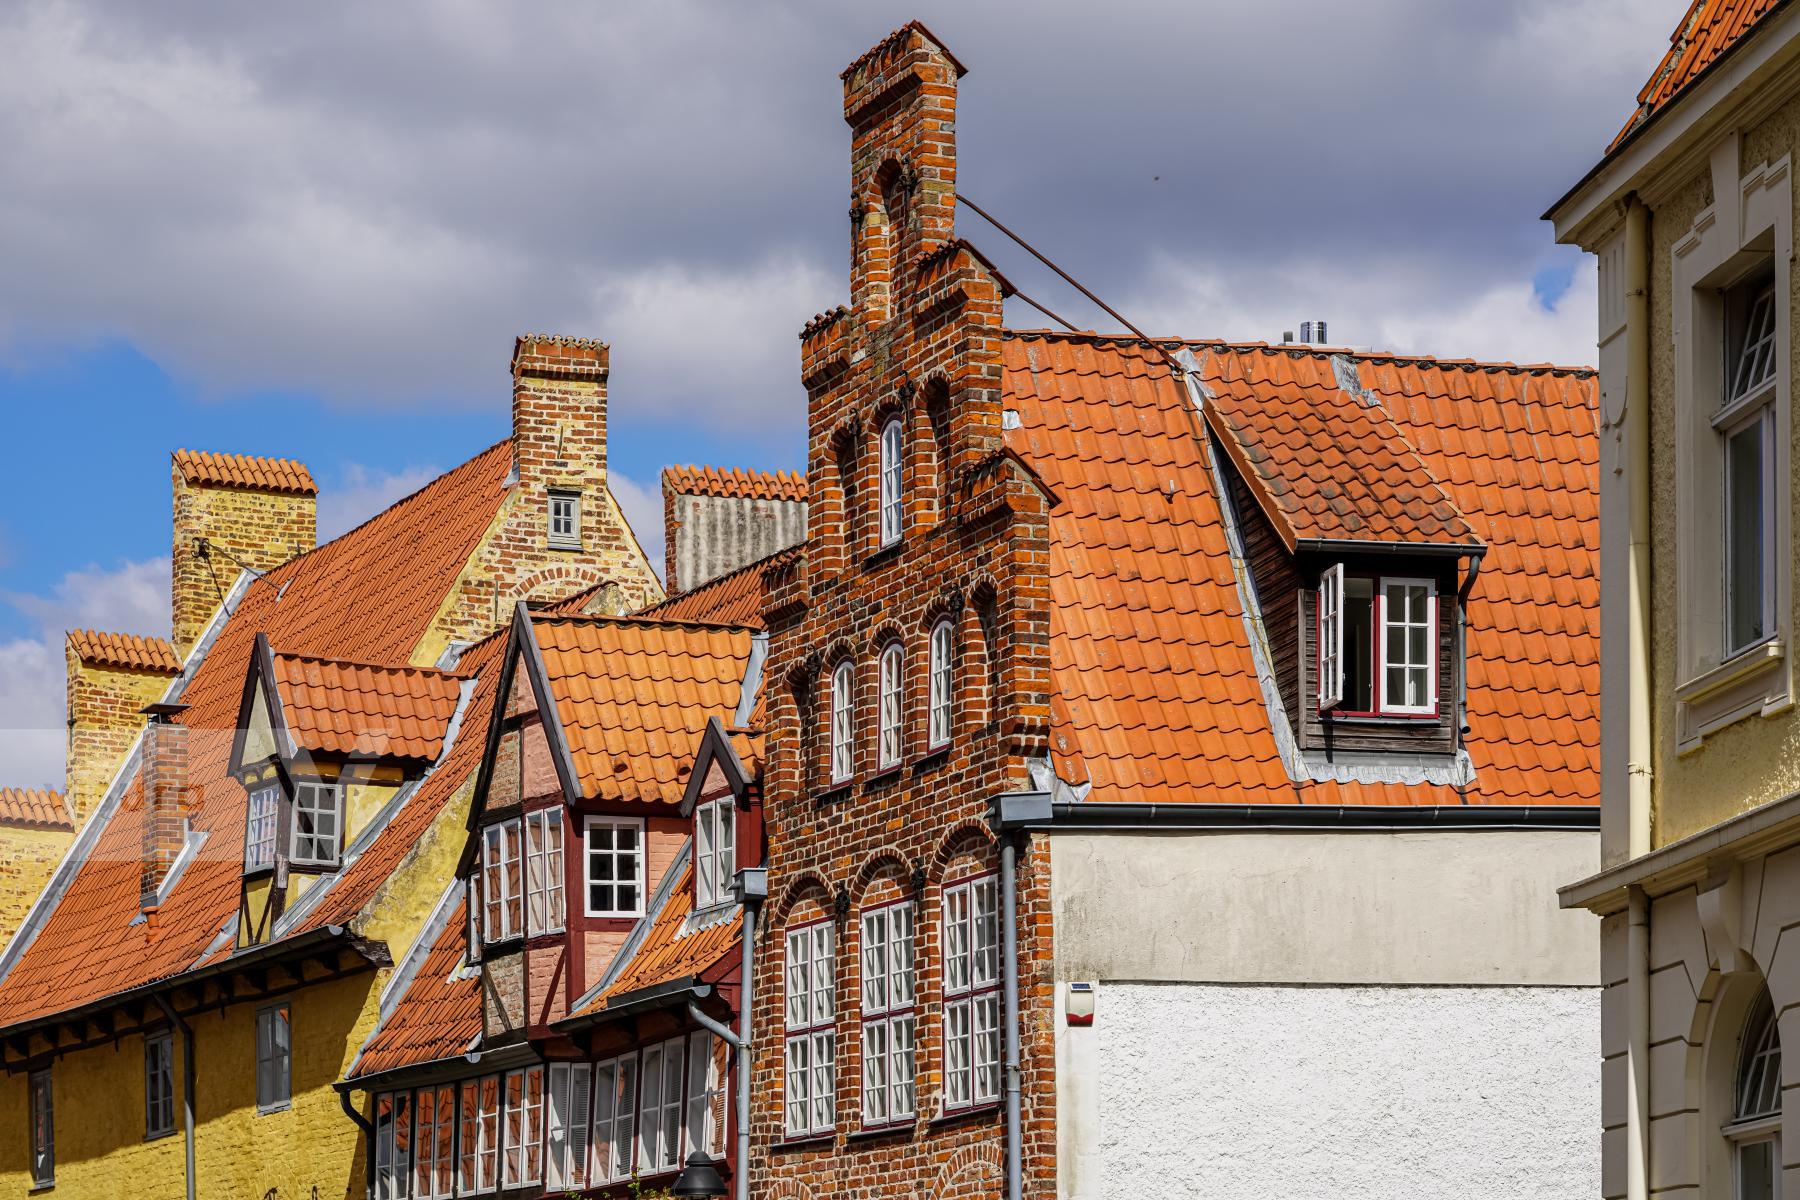 Purchase Gable Houses in Lübeck by Michael Nguyen